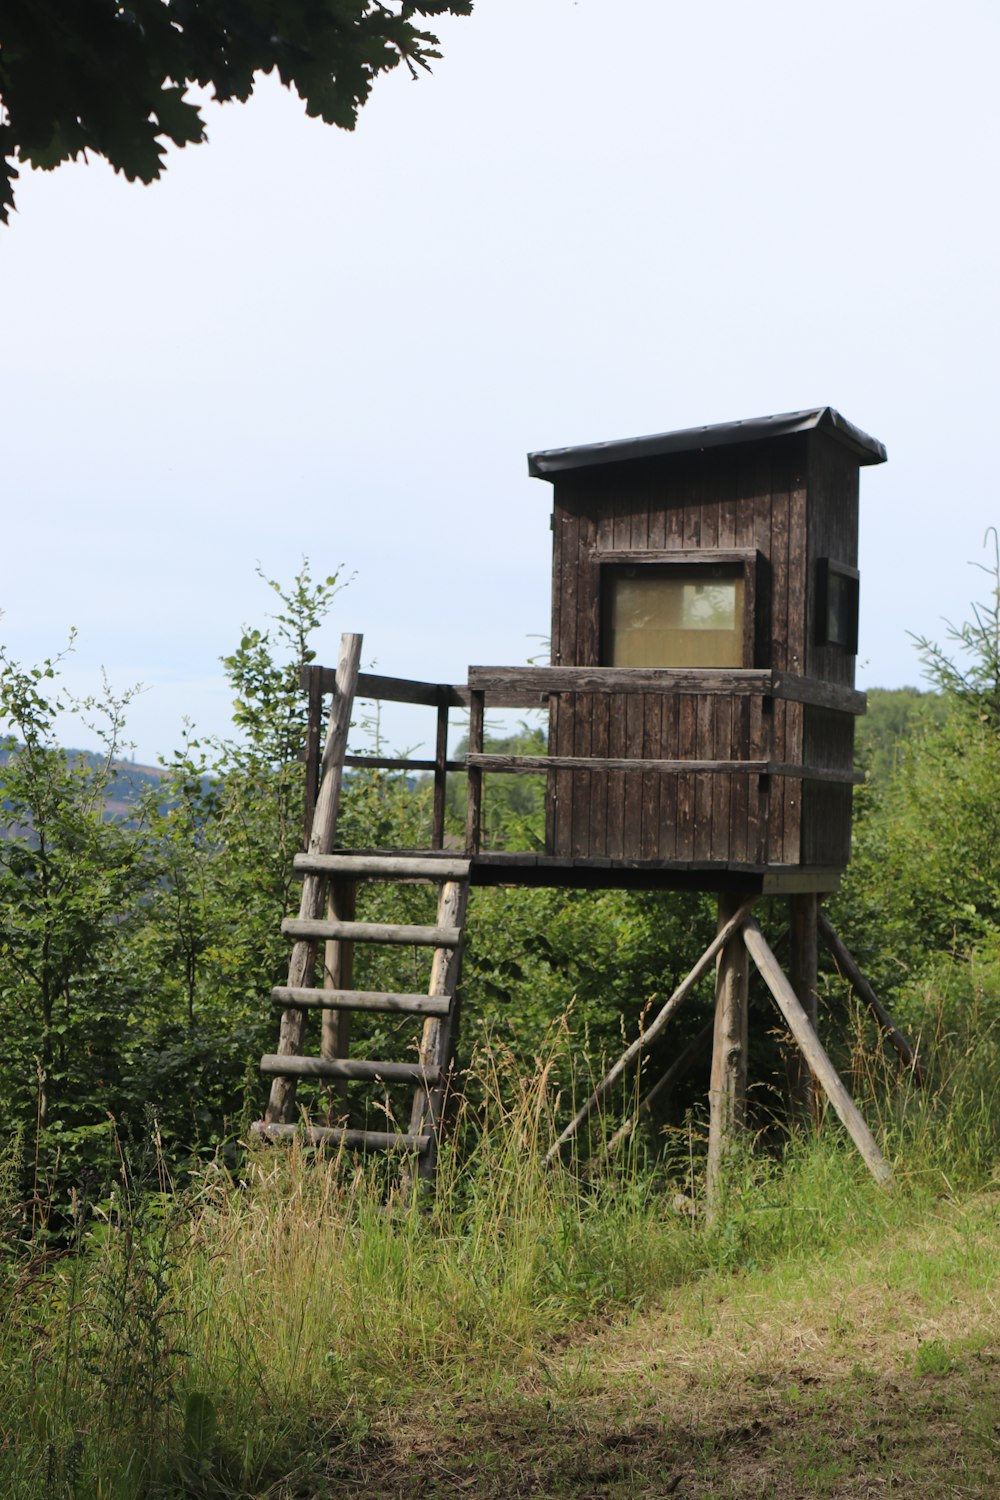 a wooden birdhouse in a grassy area